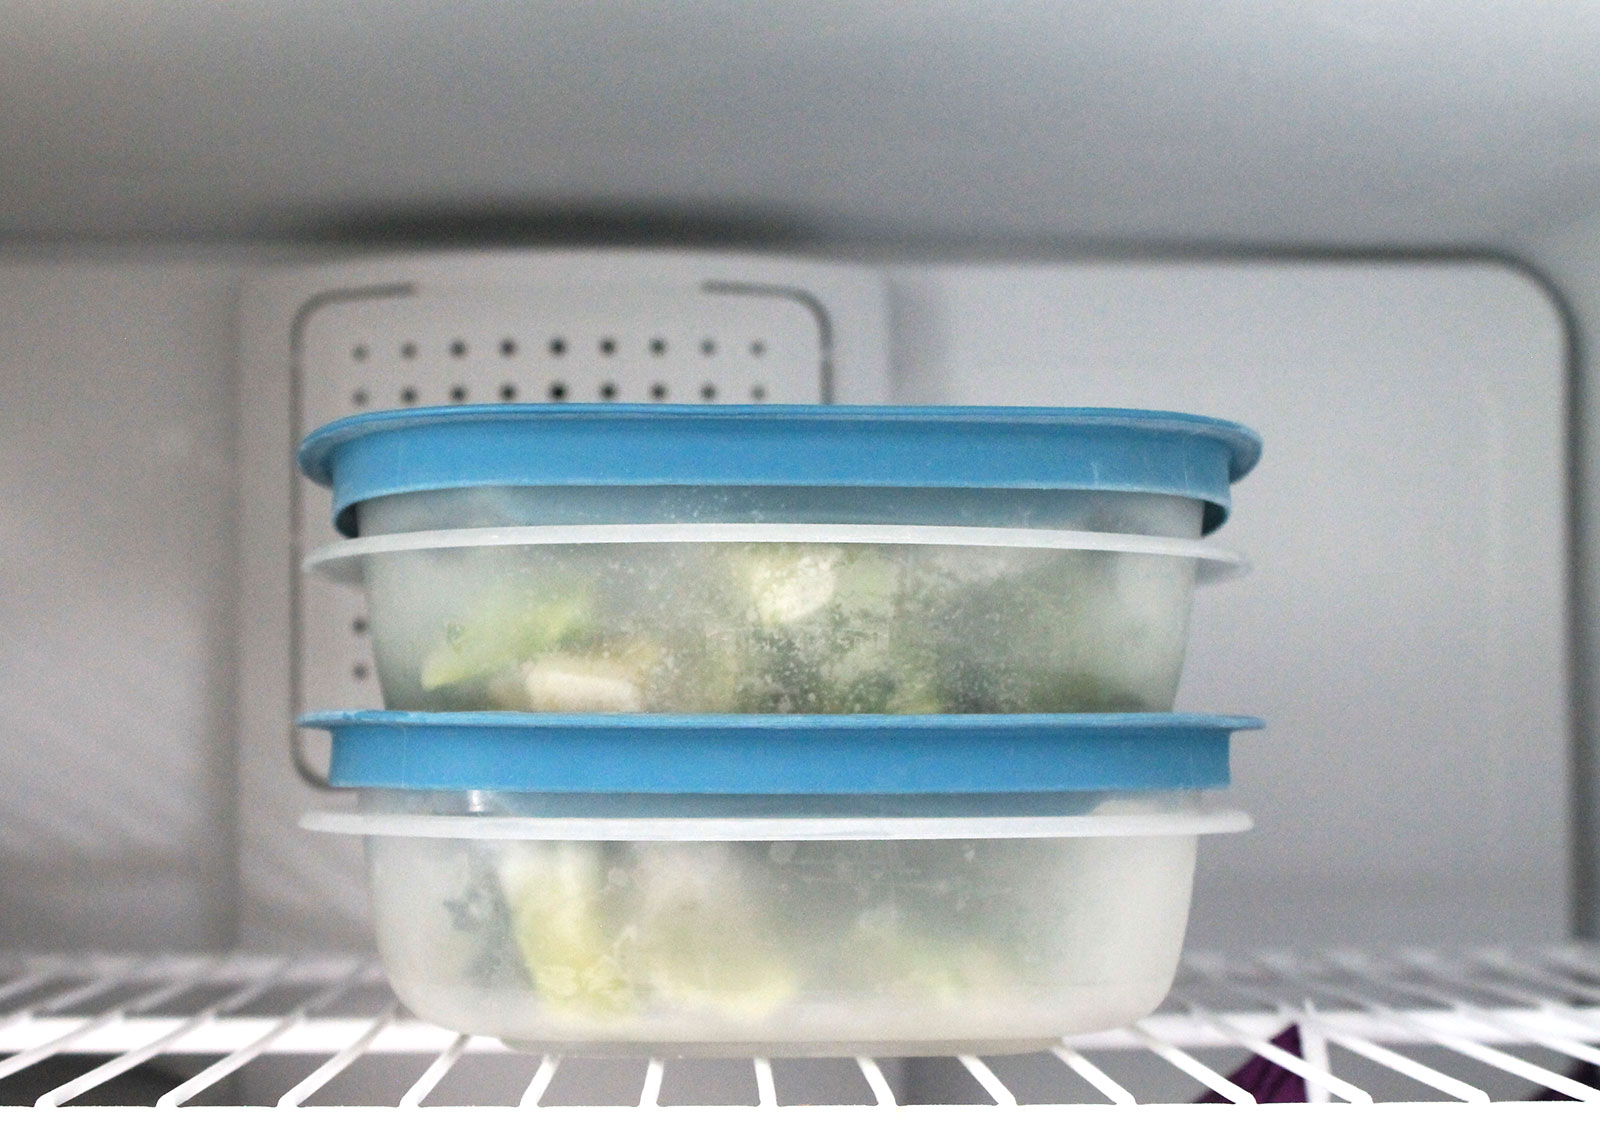 Repurpose plastic containers to store frozen compost or stock ingredients